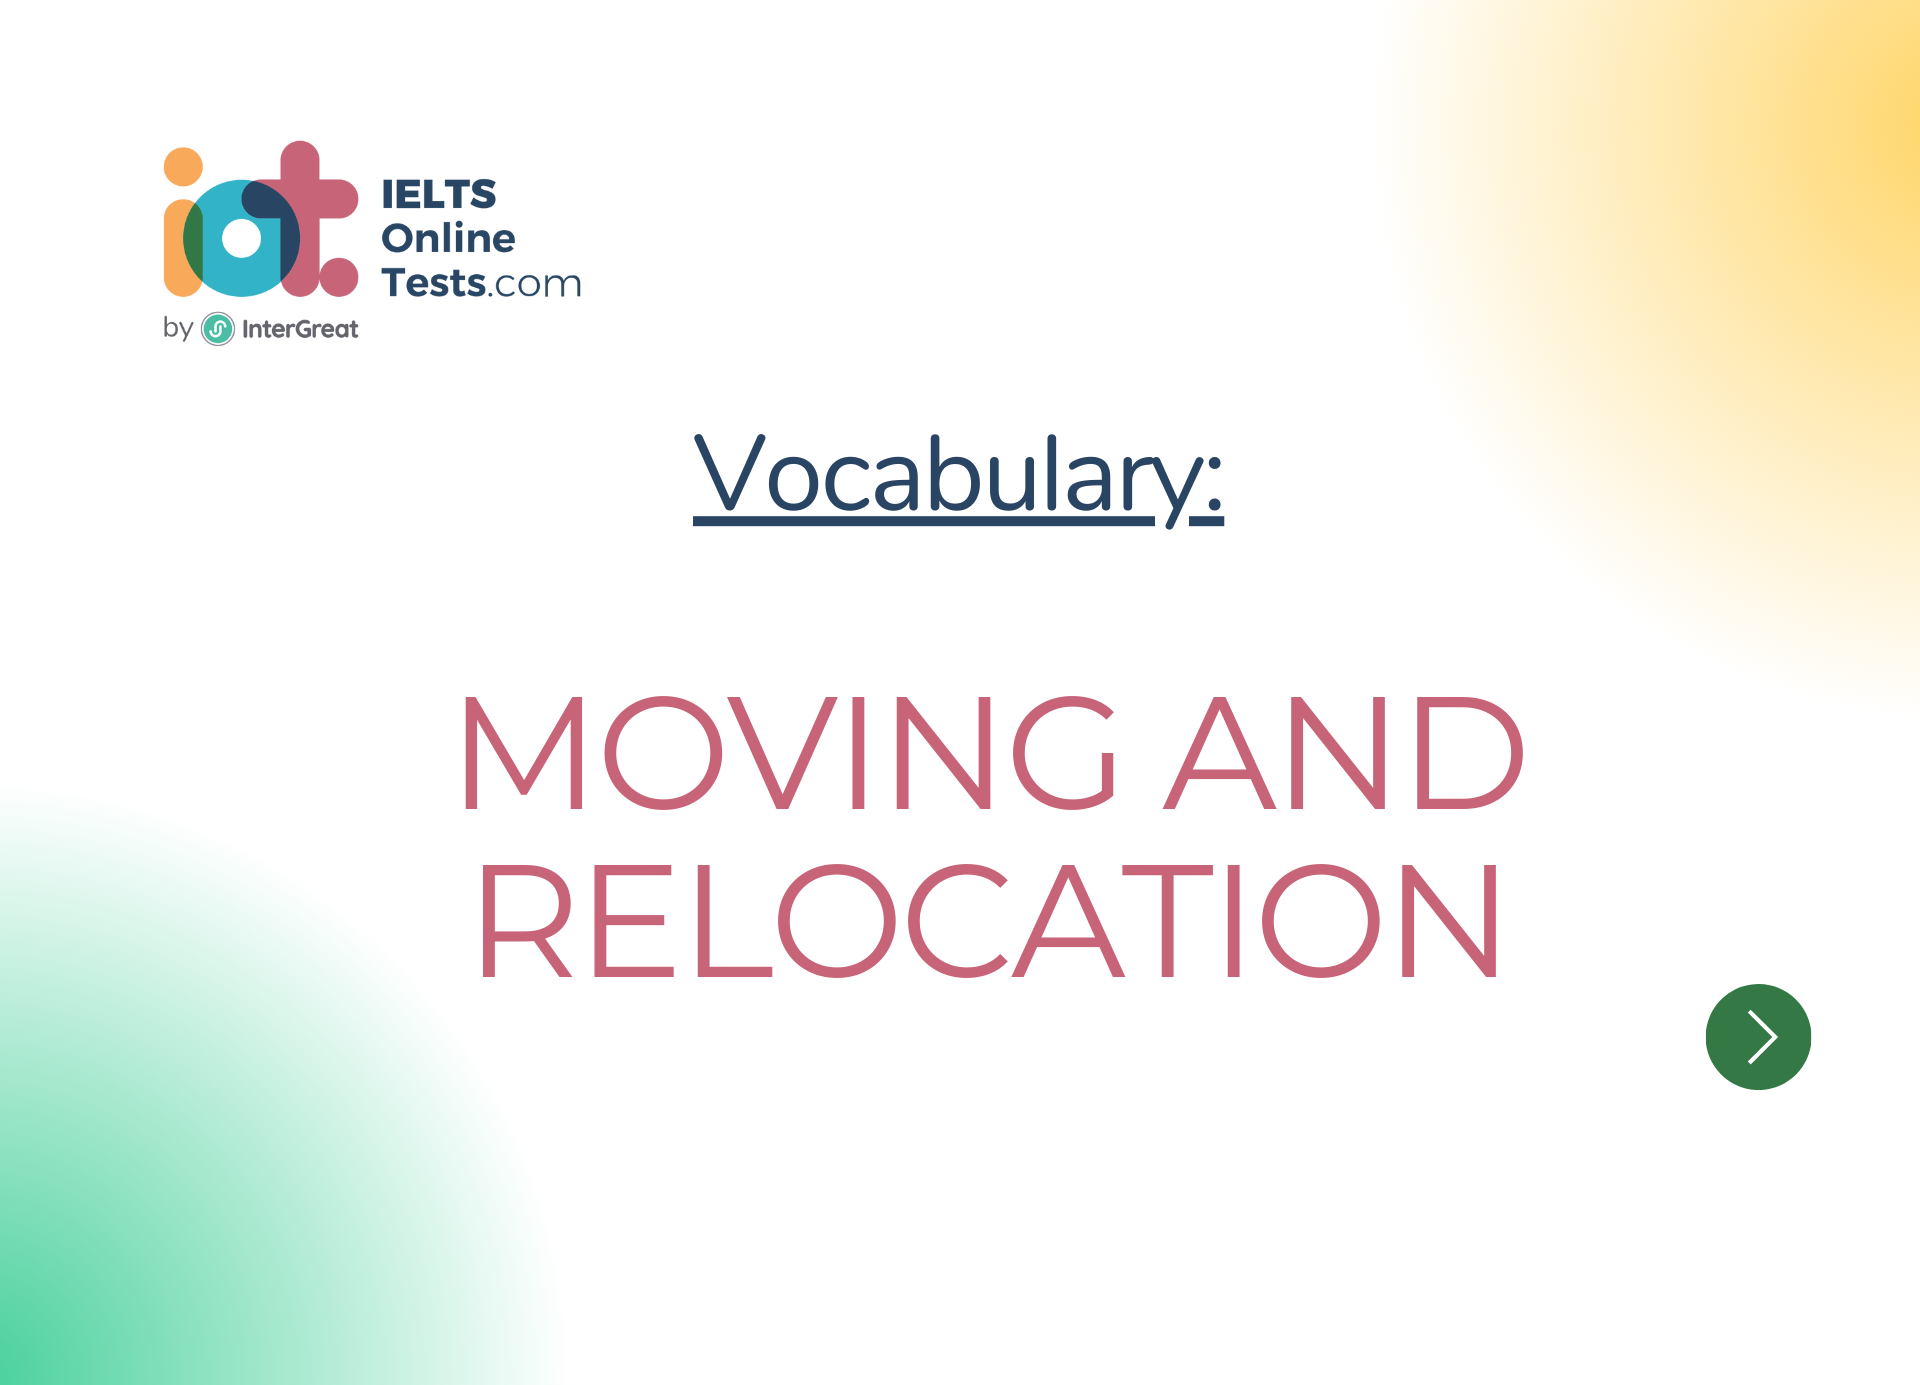 Moving and relocation